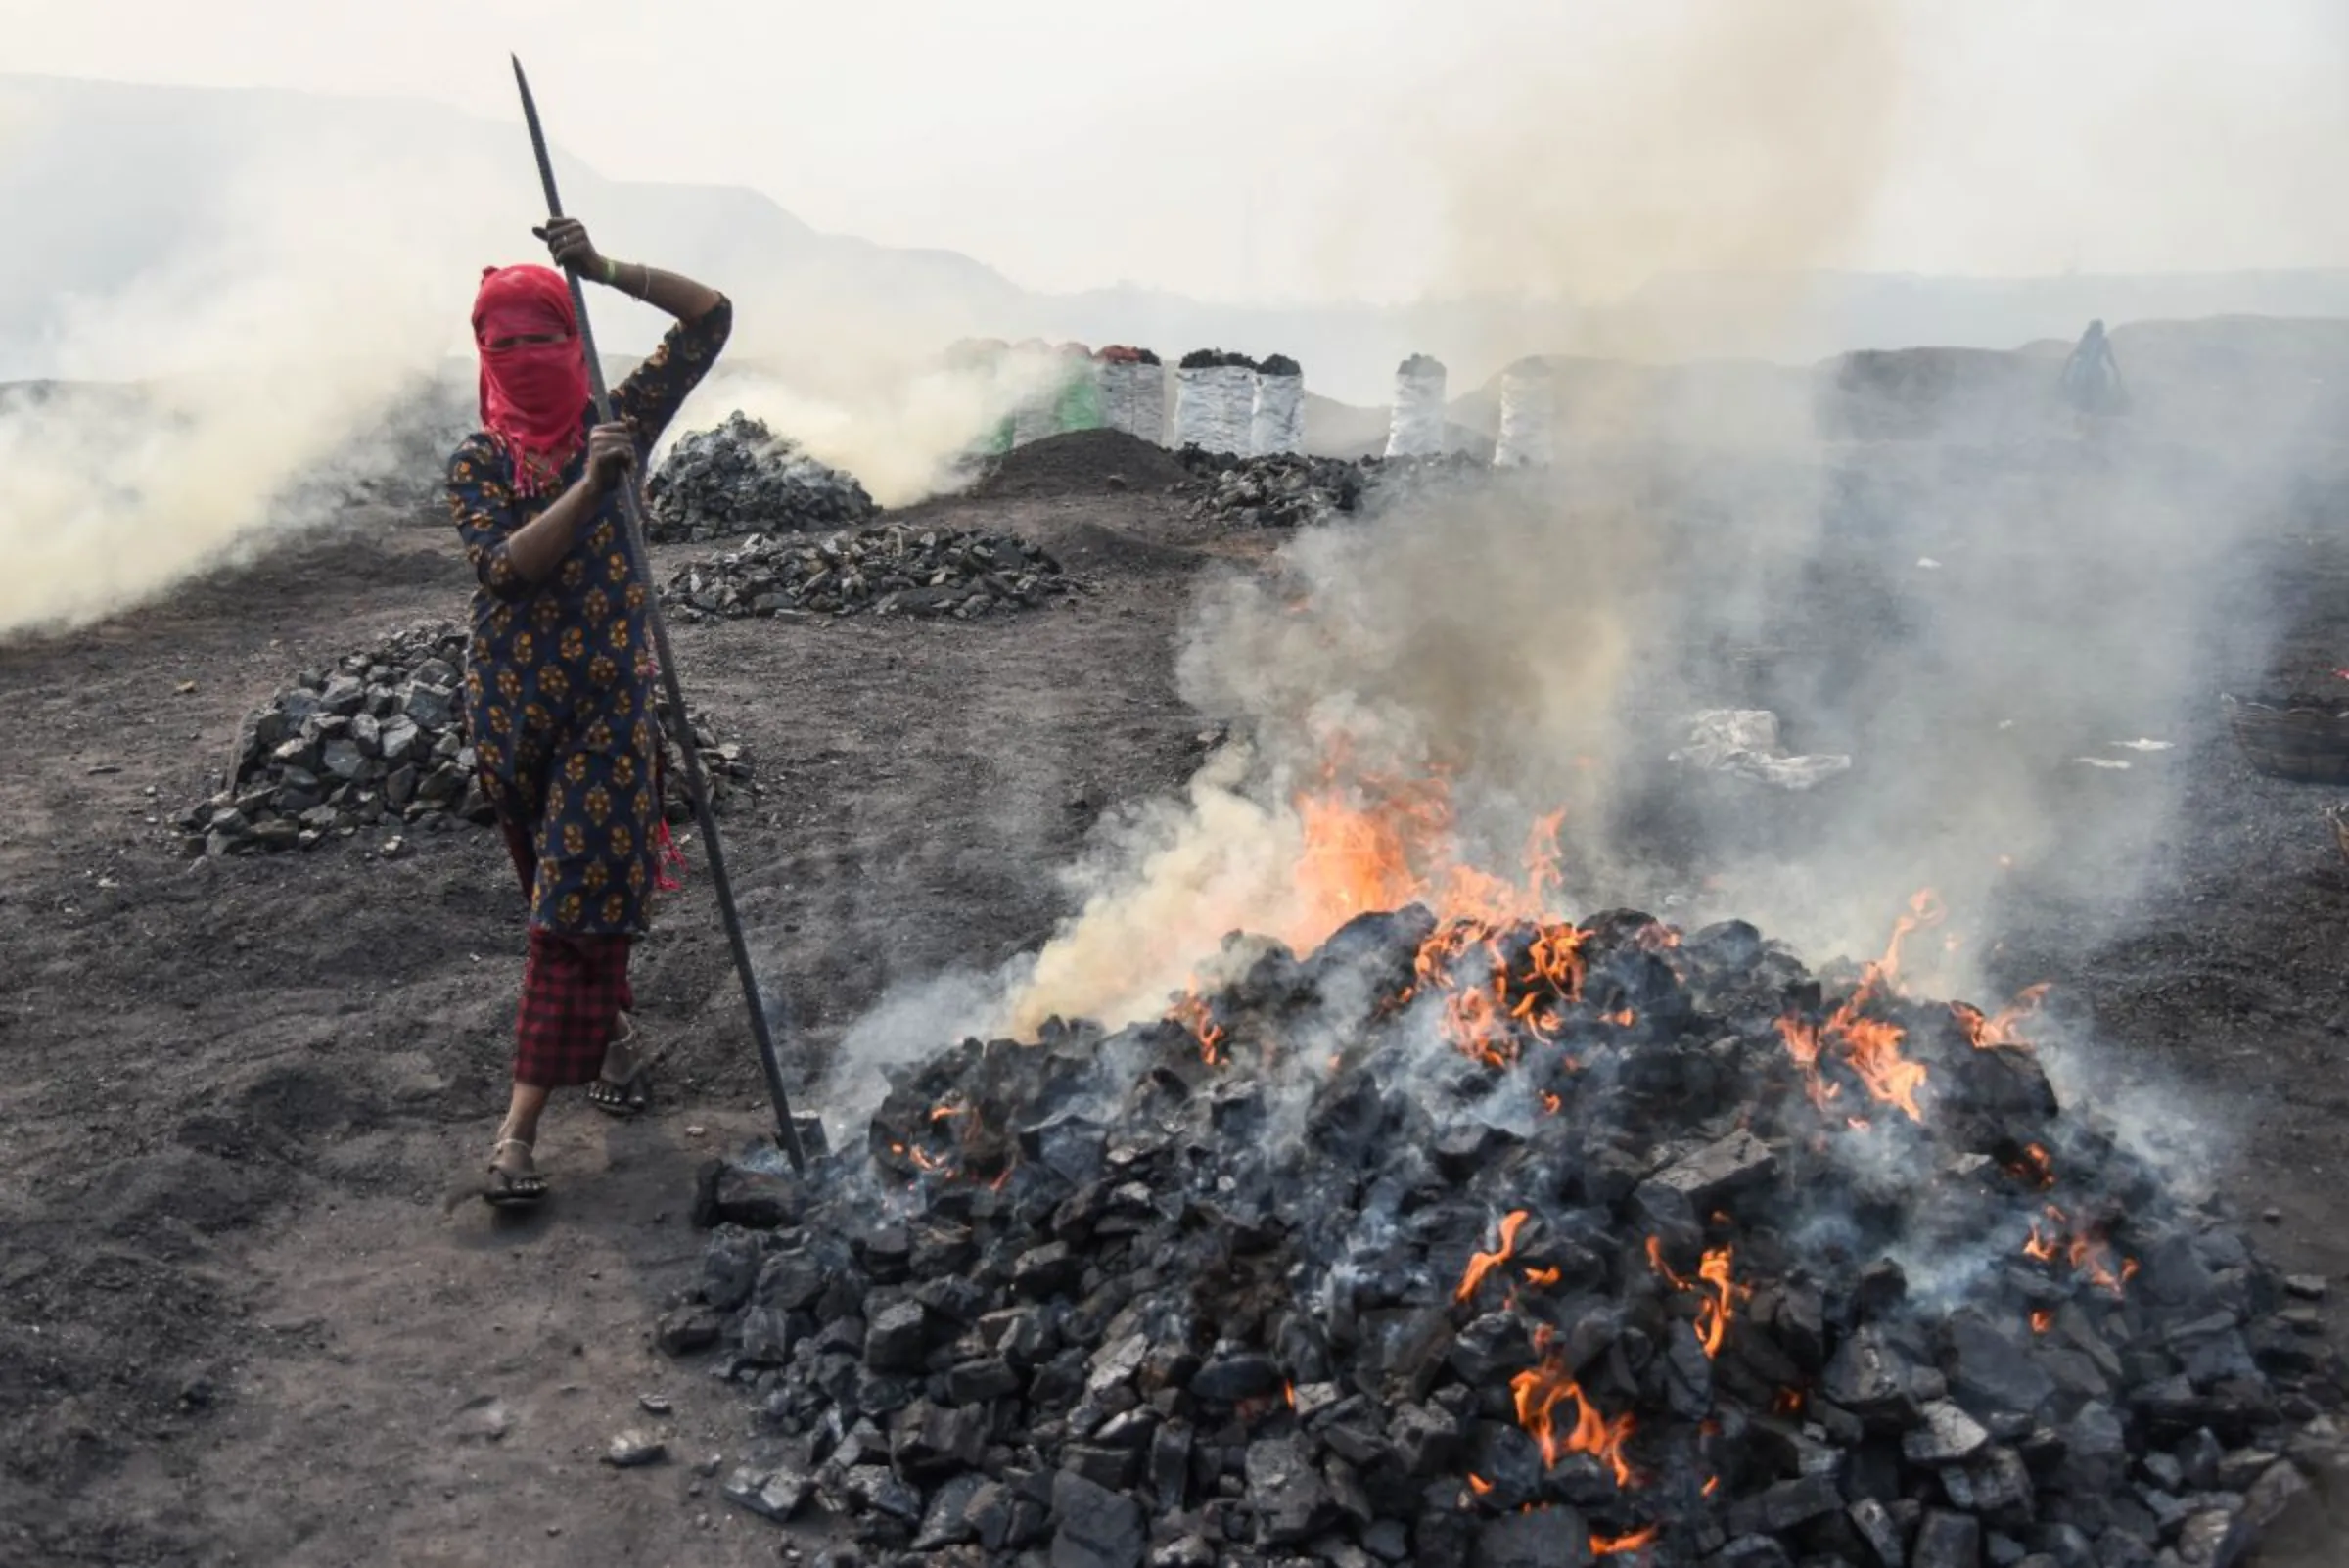 A coal scavenger Anita Devi burns coal before selling it for use at a depot in a mining area of Jharia coalfield, India, November 11, 2022. Thomson Reuters Foundation/Tanmoy Bhaduri